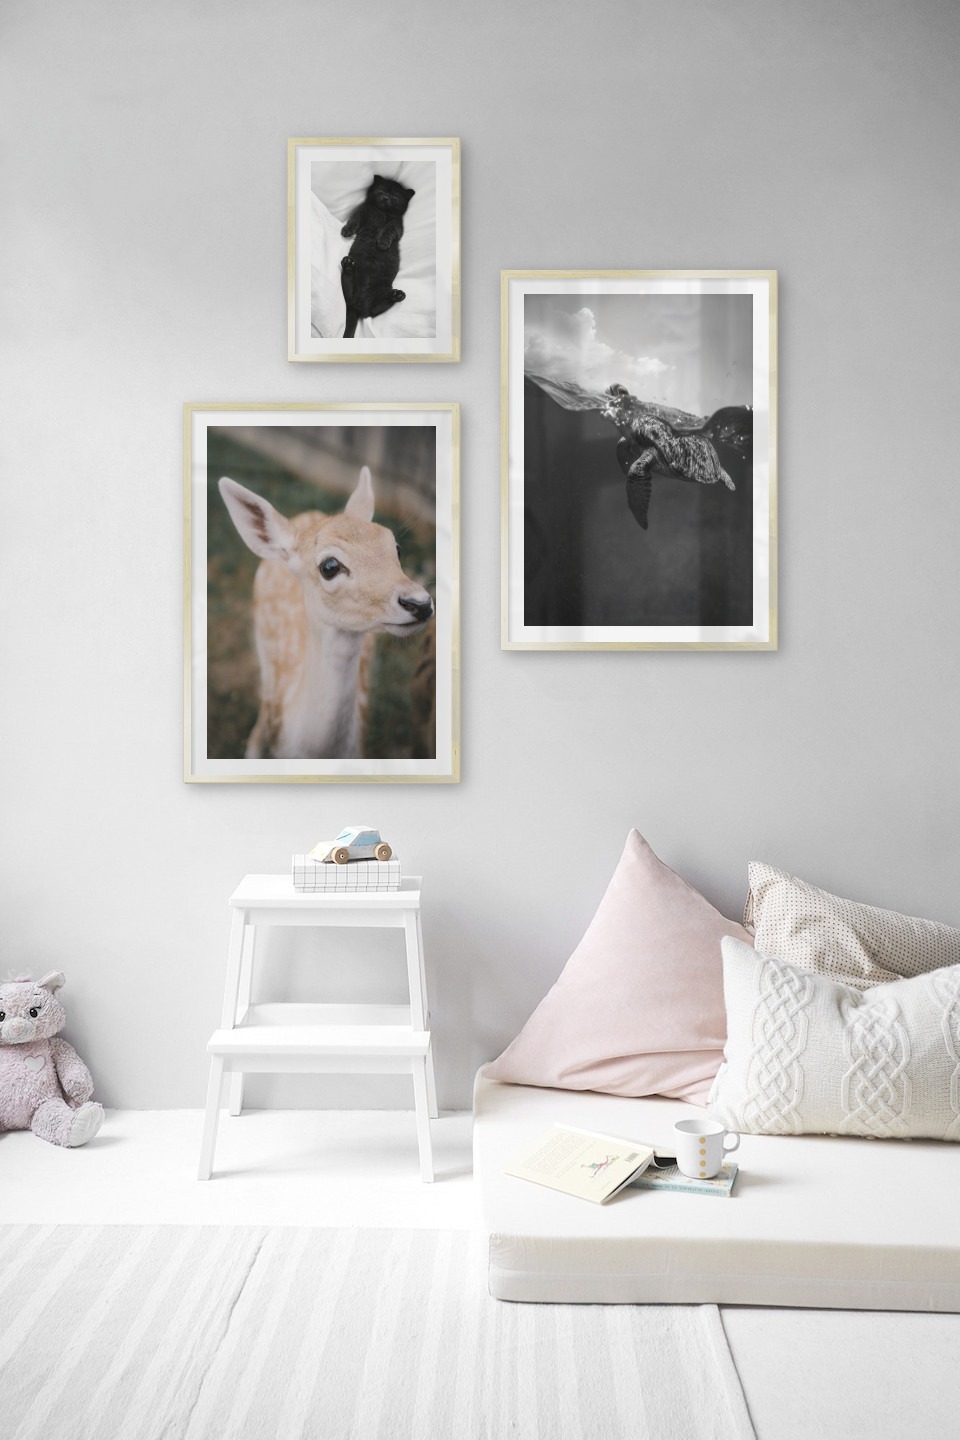 Gallery wall with picture frames in gold in sizes 30x40 and 50x70 with prints "Cat in bed", "Deer" and "Turtle"